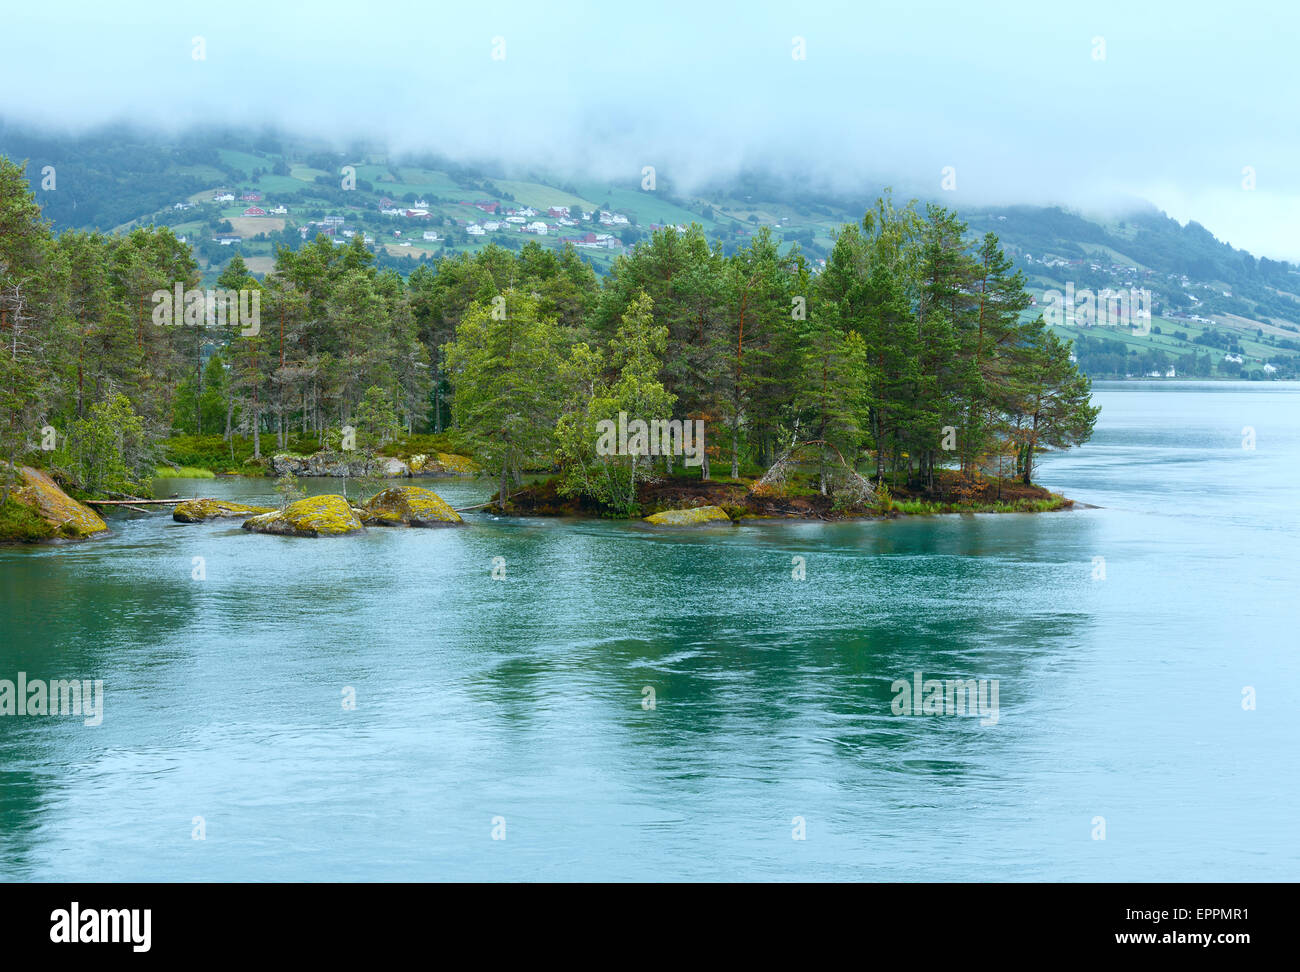 Summer cloudy fjord landscape with fir forest on shore (Norway). Stock Photo